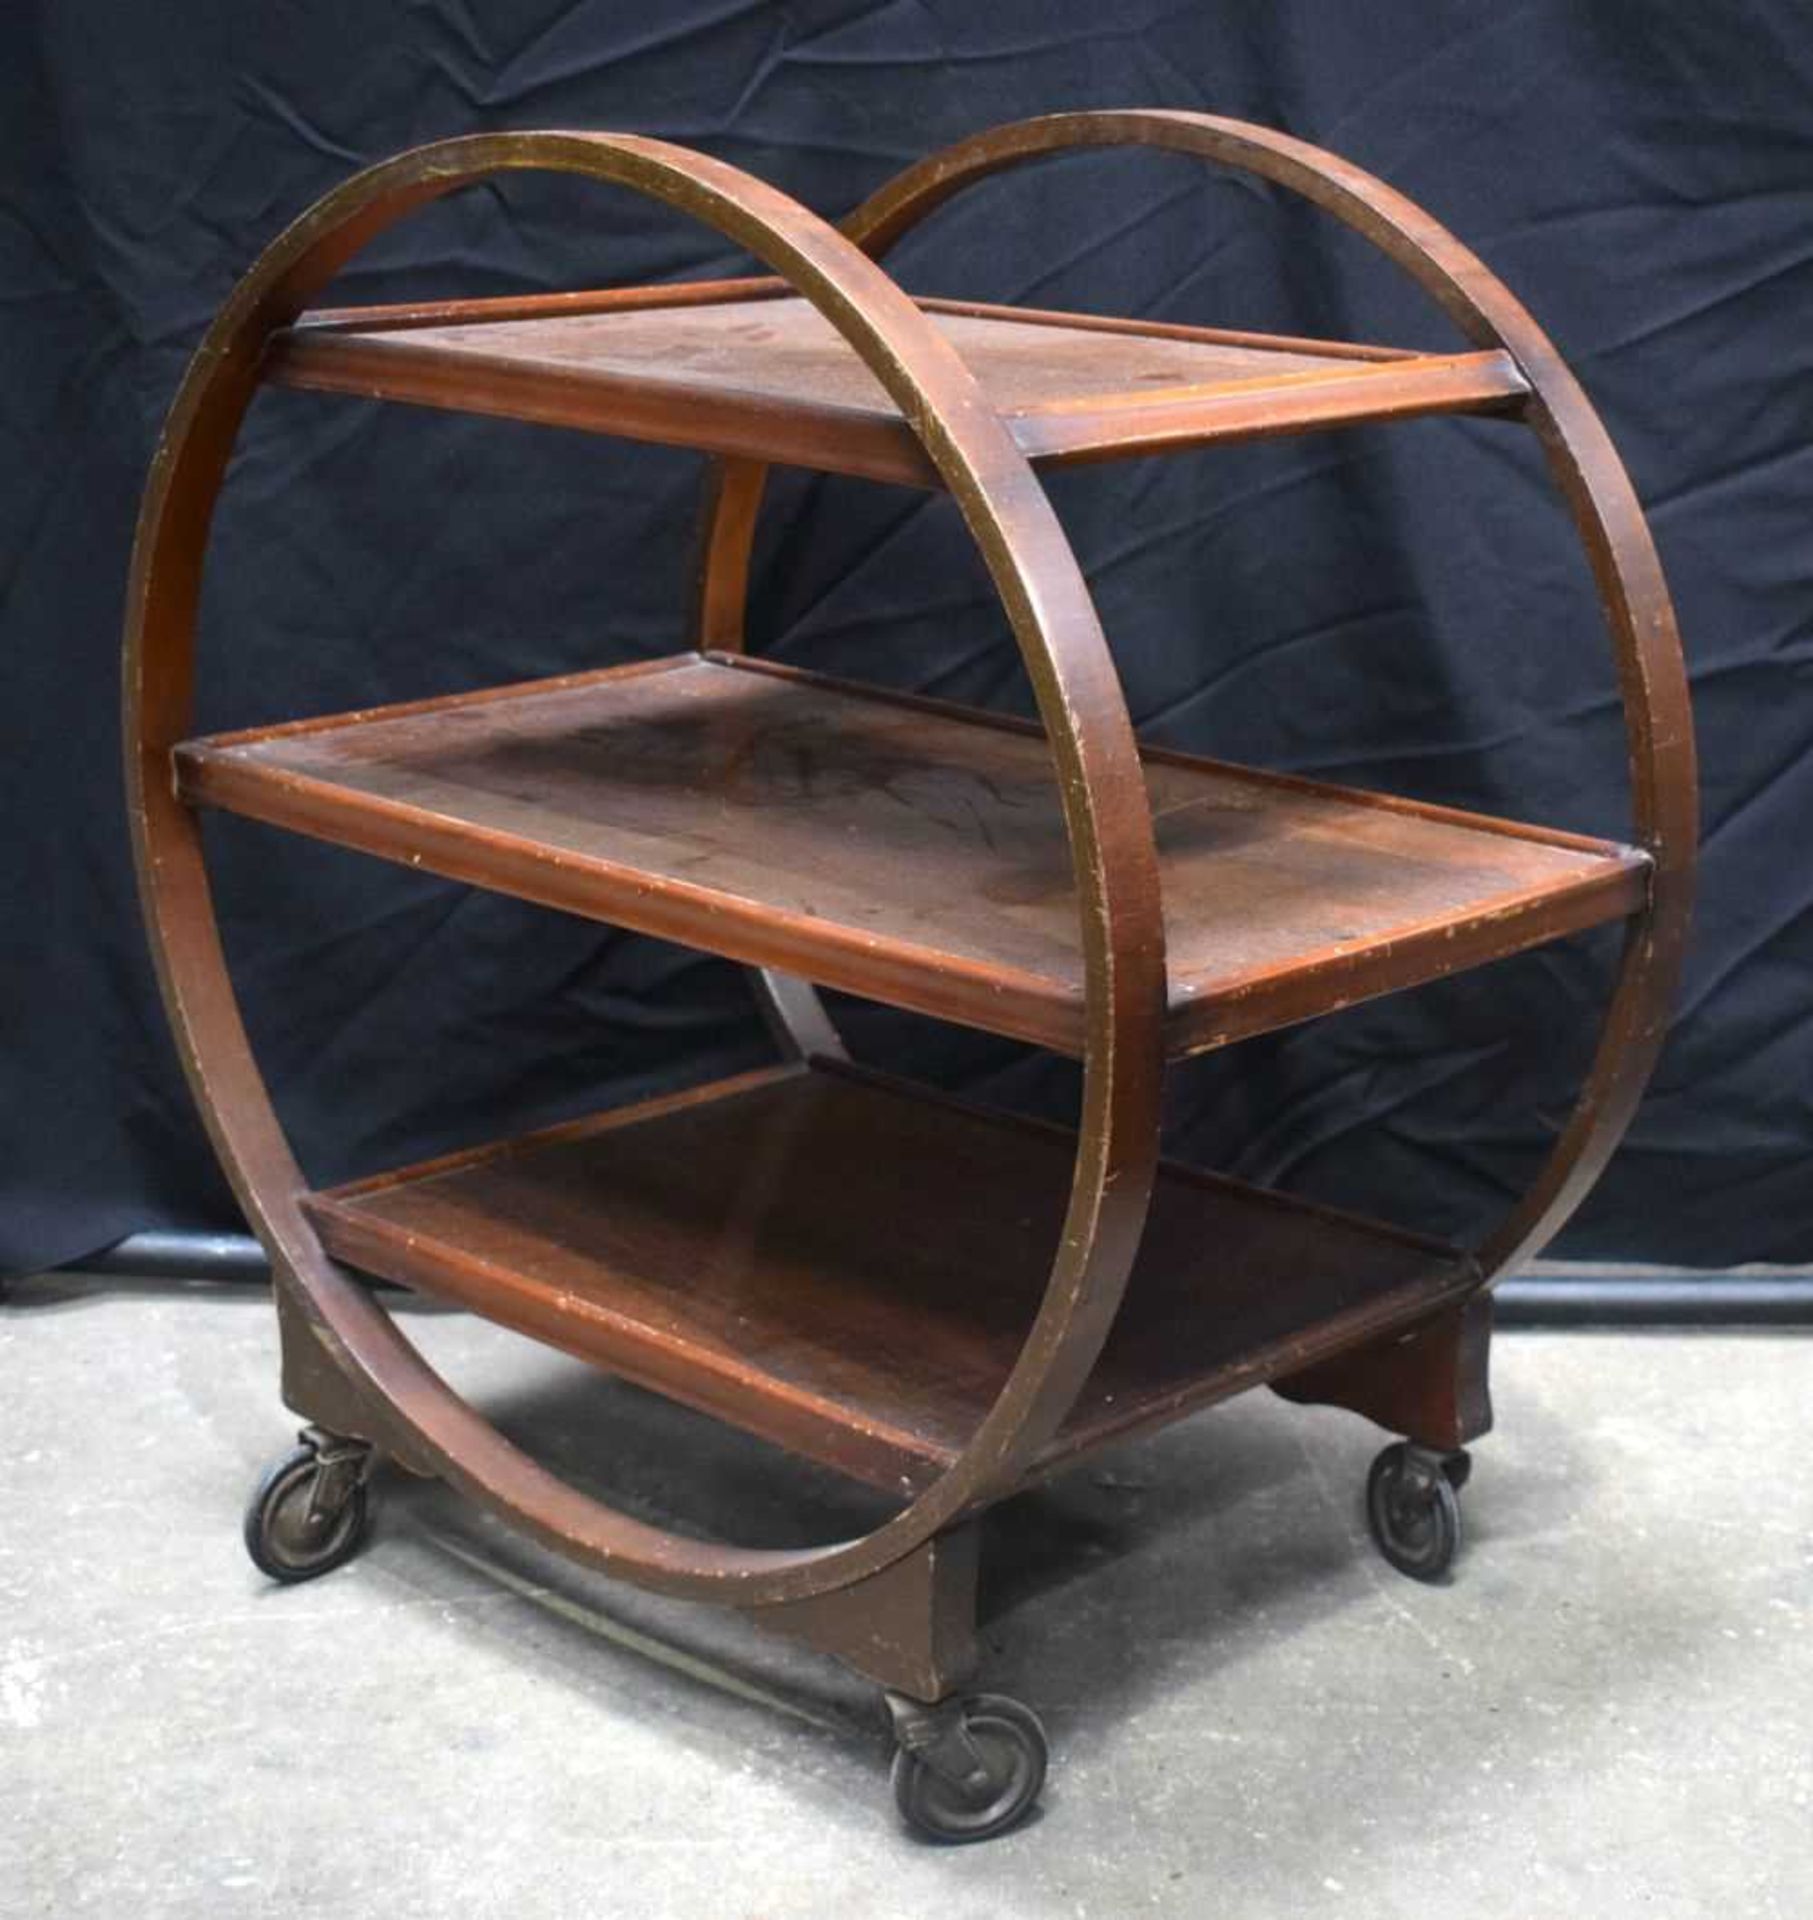 A Mid Century Art Deco style wooden Hostess trolley on wheels 77 x 70 x 43 cm. - Image 3 of 3